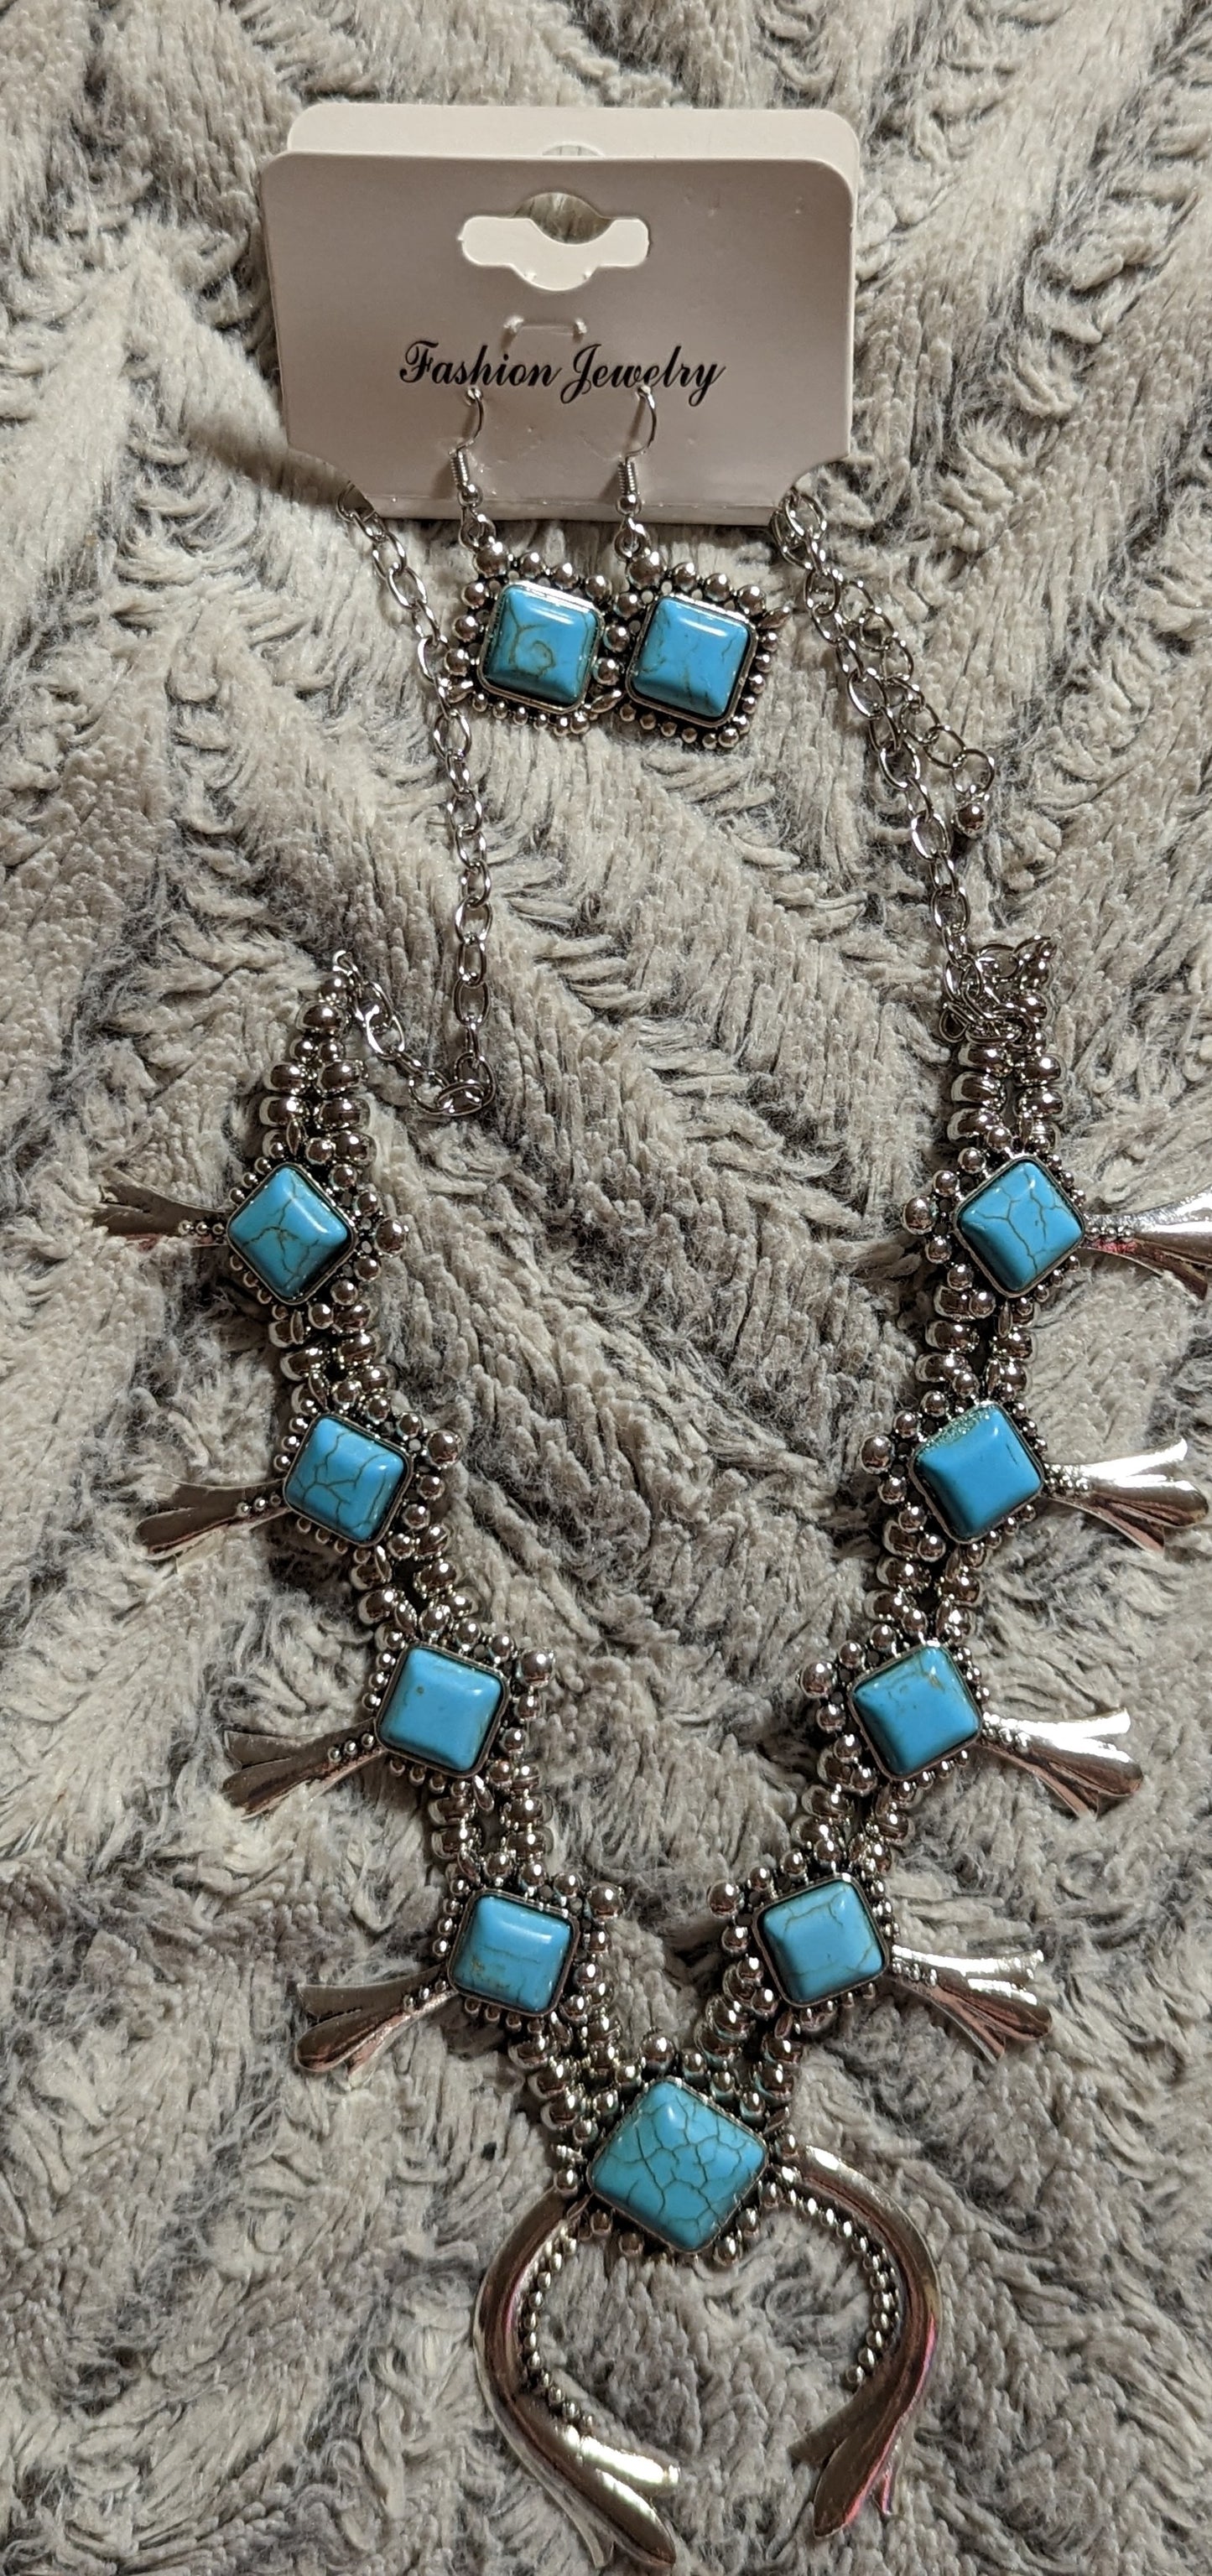 Way down south - Turquoise Necklace Set